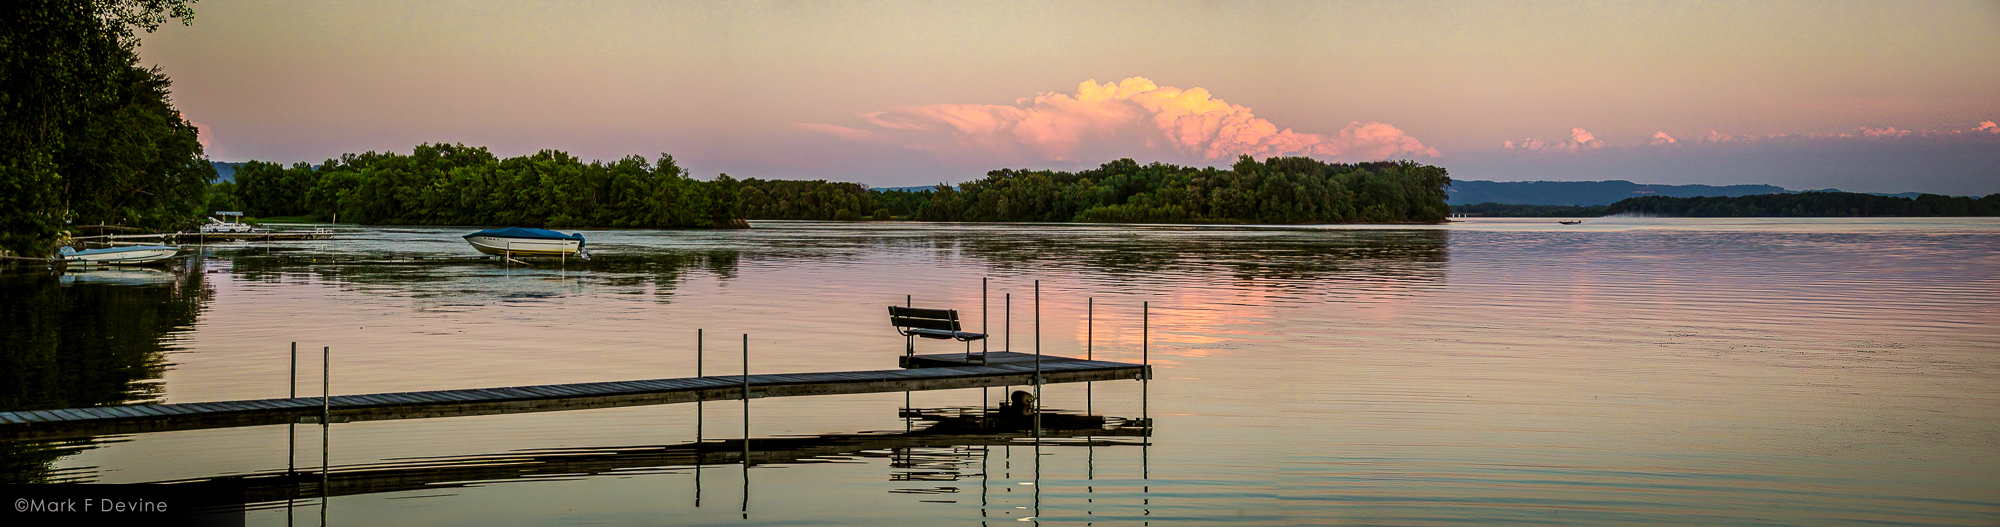 Sunset on Lake Onalaska. Storm clouds to the south.